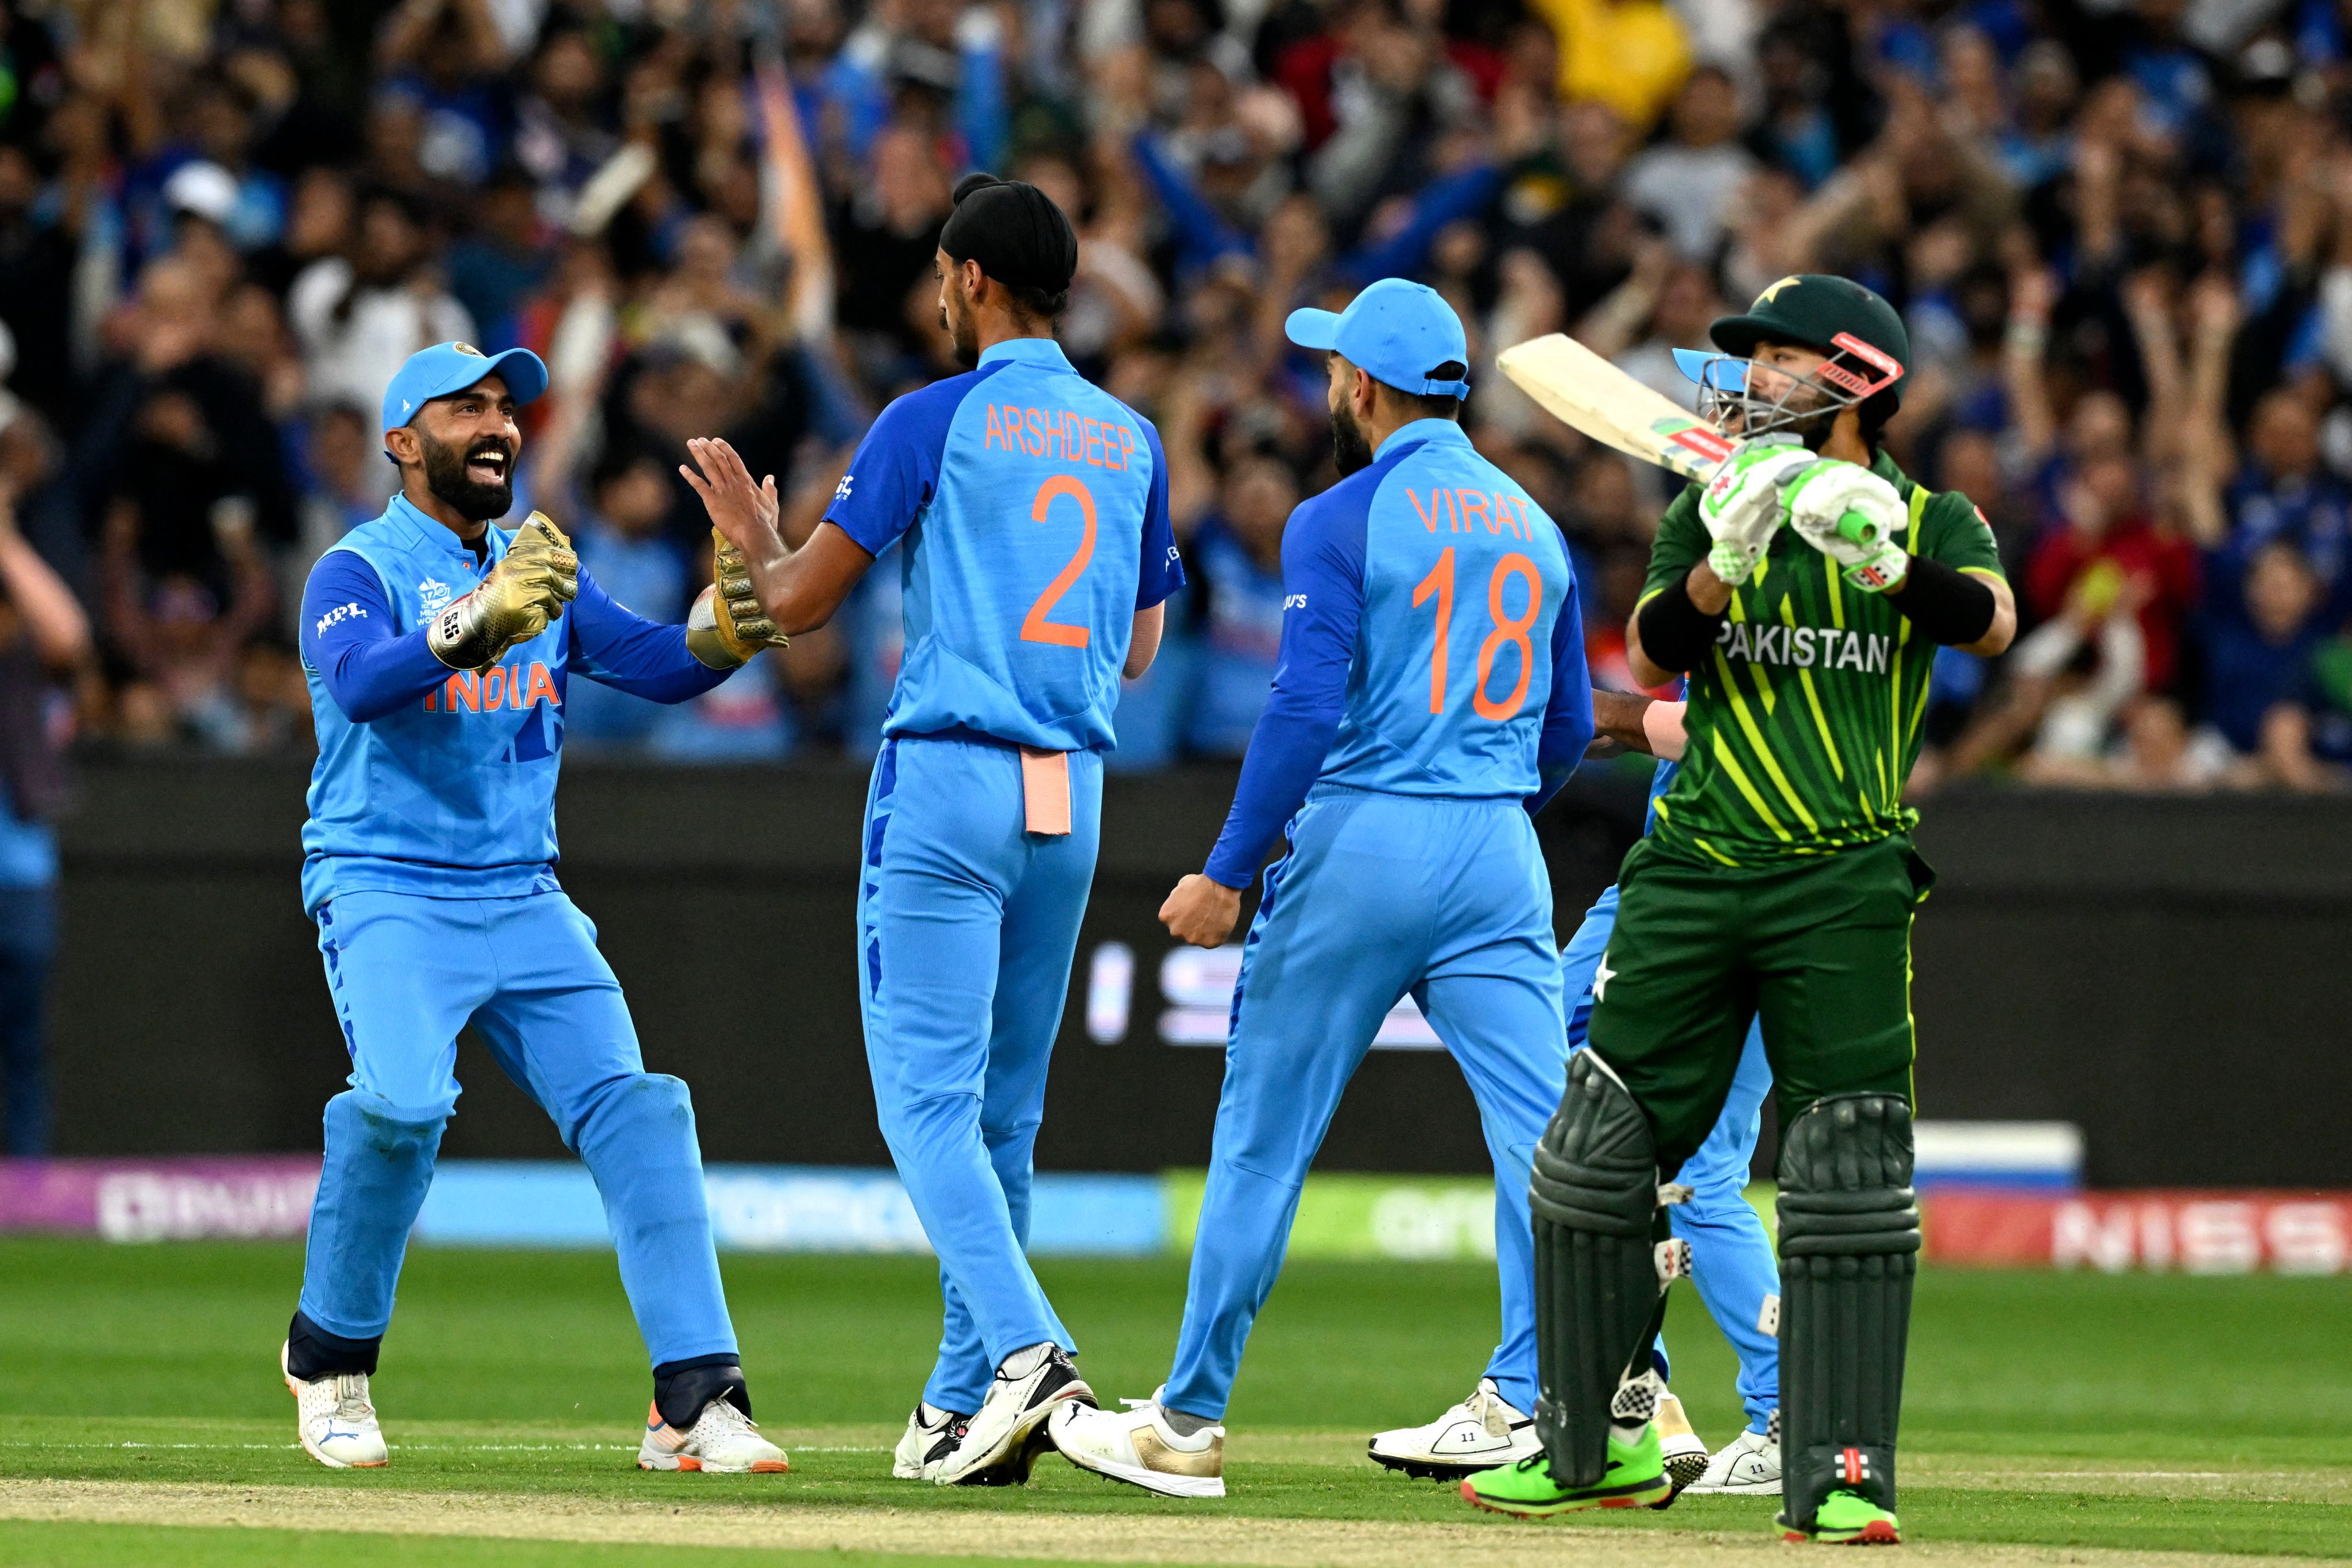 IND vs PAK LIVE: Arshdeep Singh makes Pakistan batters DANCE to his TUNES! Dismisses Babar Azam & Mohd Rizwan for 0 & 2 in MEGA CLASH, gets Asia Cup revenge - Watch video